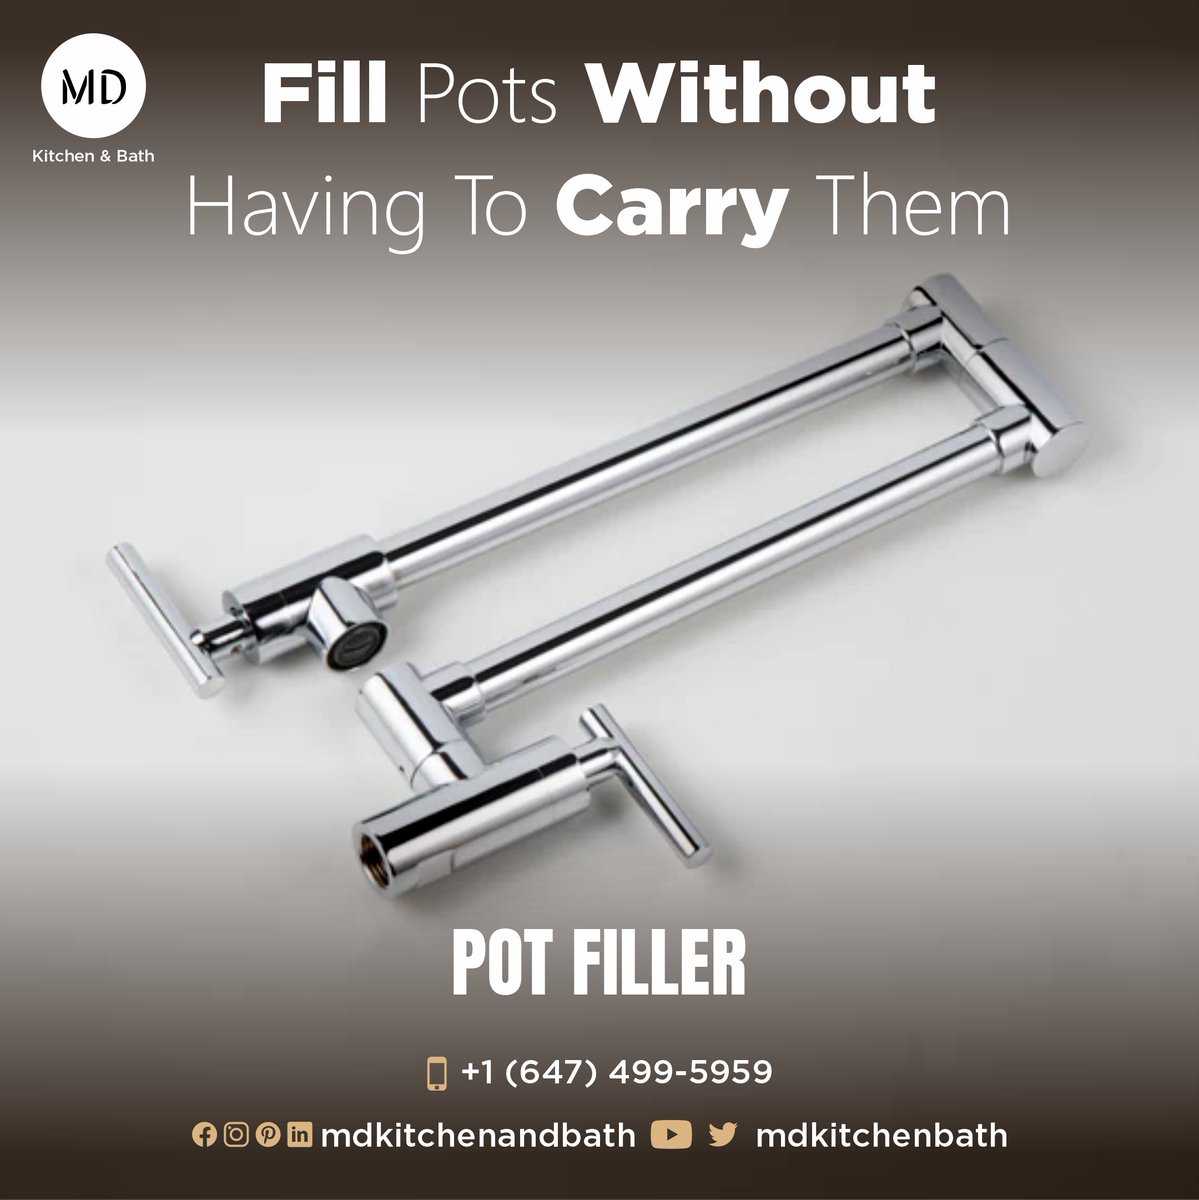 A pot filler is a faucet, fill pots with water without having to carry them from the sink.
.
.
.
#PotFiller #PotFillerFaucet #Faucet #KitchenFaucet
#KitchenTap #KitchenSink #SaveTime #SaveEnergy
#KingstonFaucet #KingstonKitchen #KingstonRenovation #MDKitchenandBath